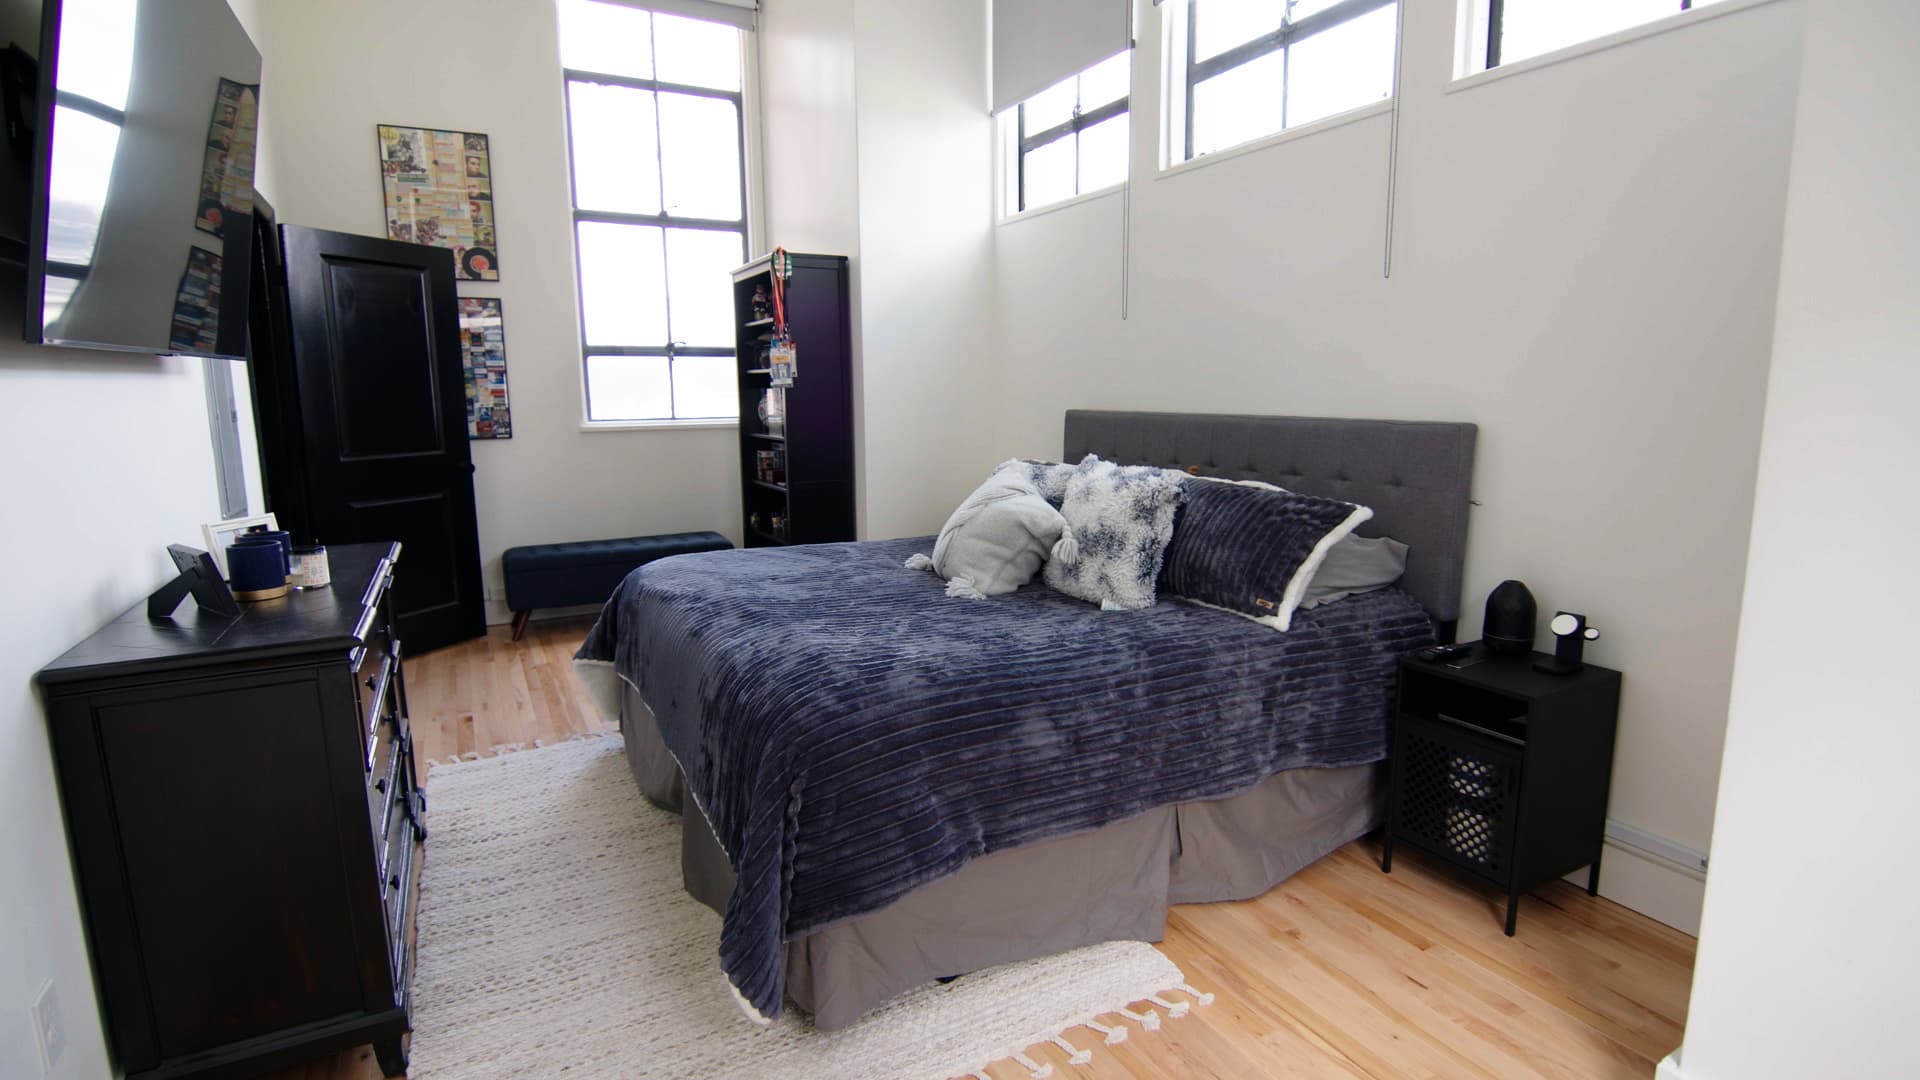 Bedrooms have a lot of natural light thanks to the old high school's large windows.